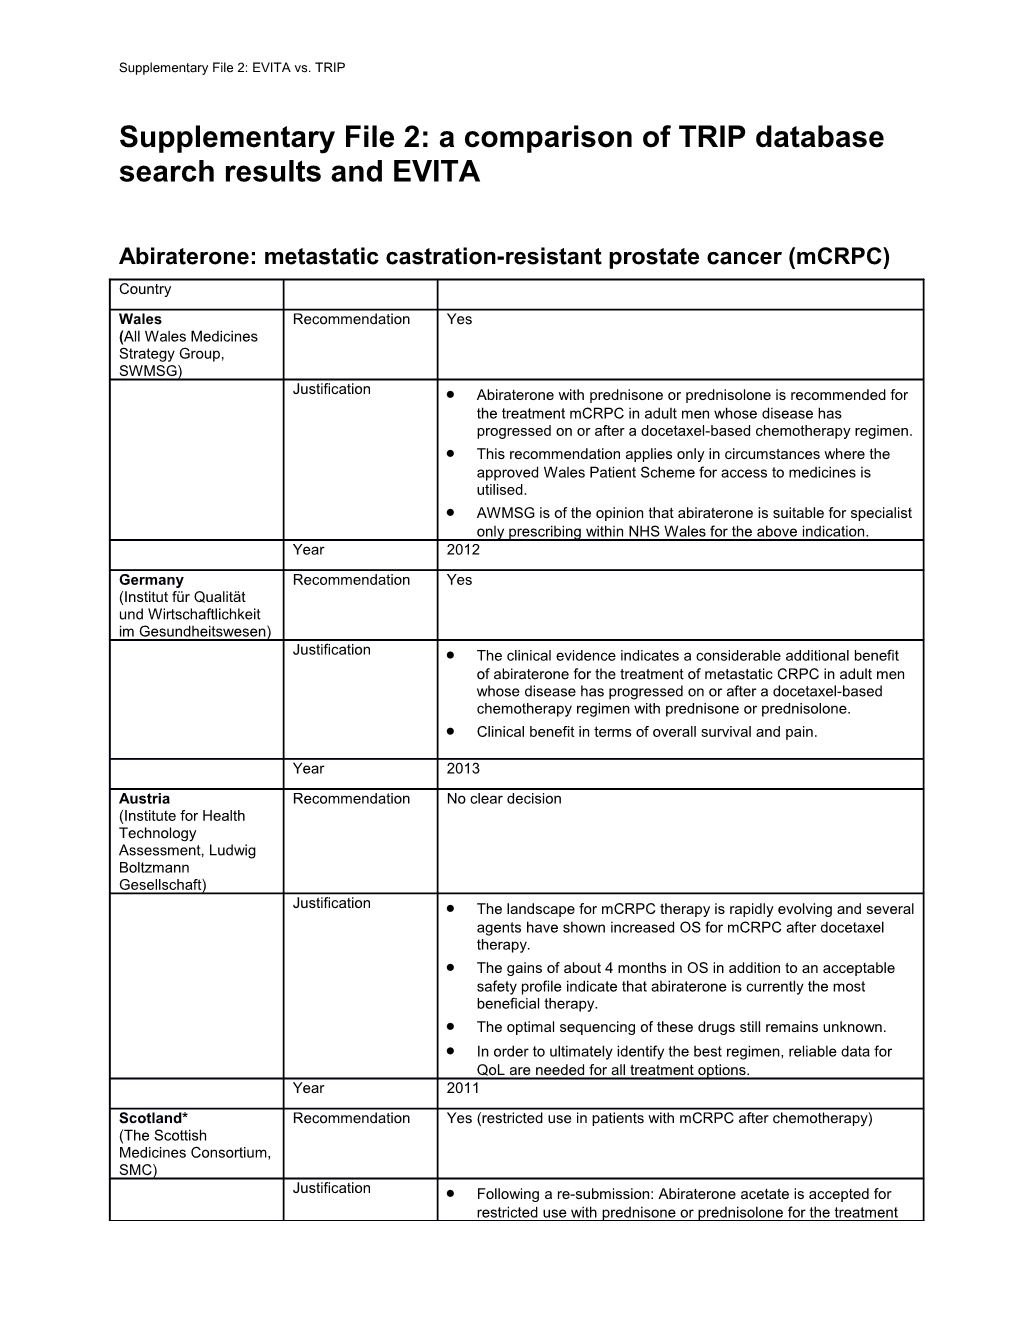 Supplementary File 2: a Comparison of TRIP Database Search Results and EVITA